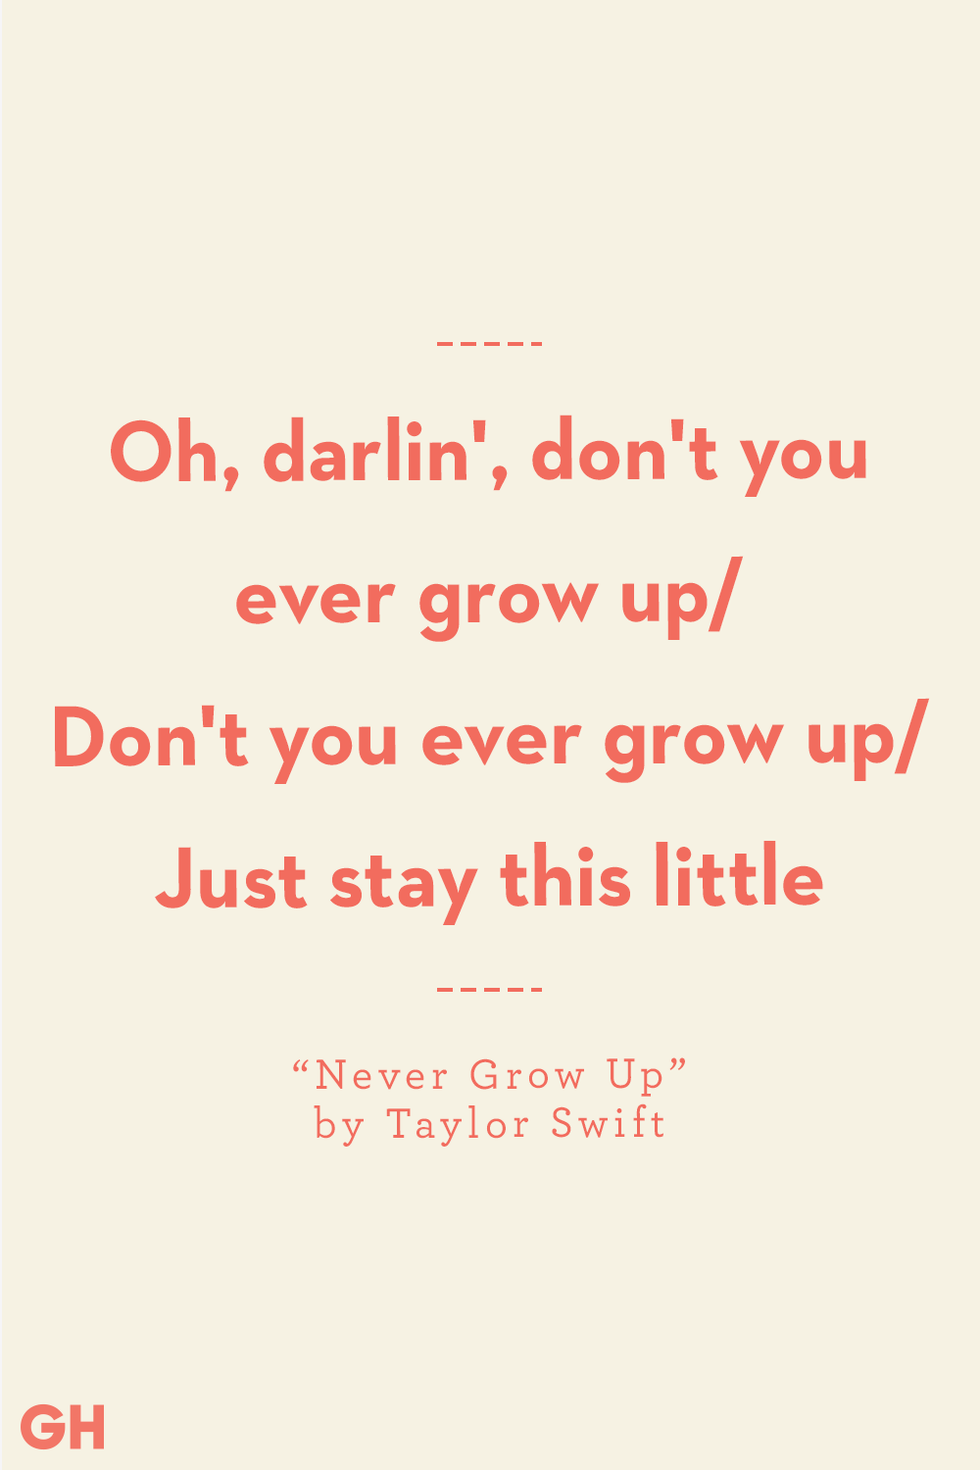 mother and son quotes taylor swift